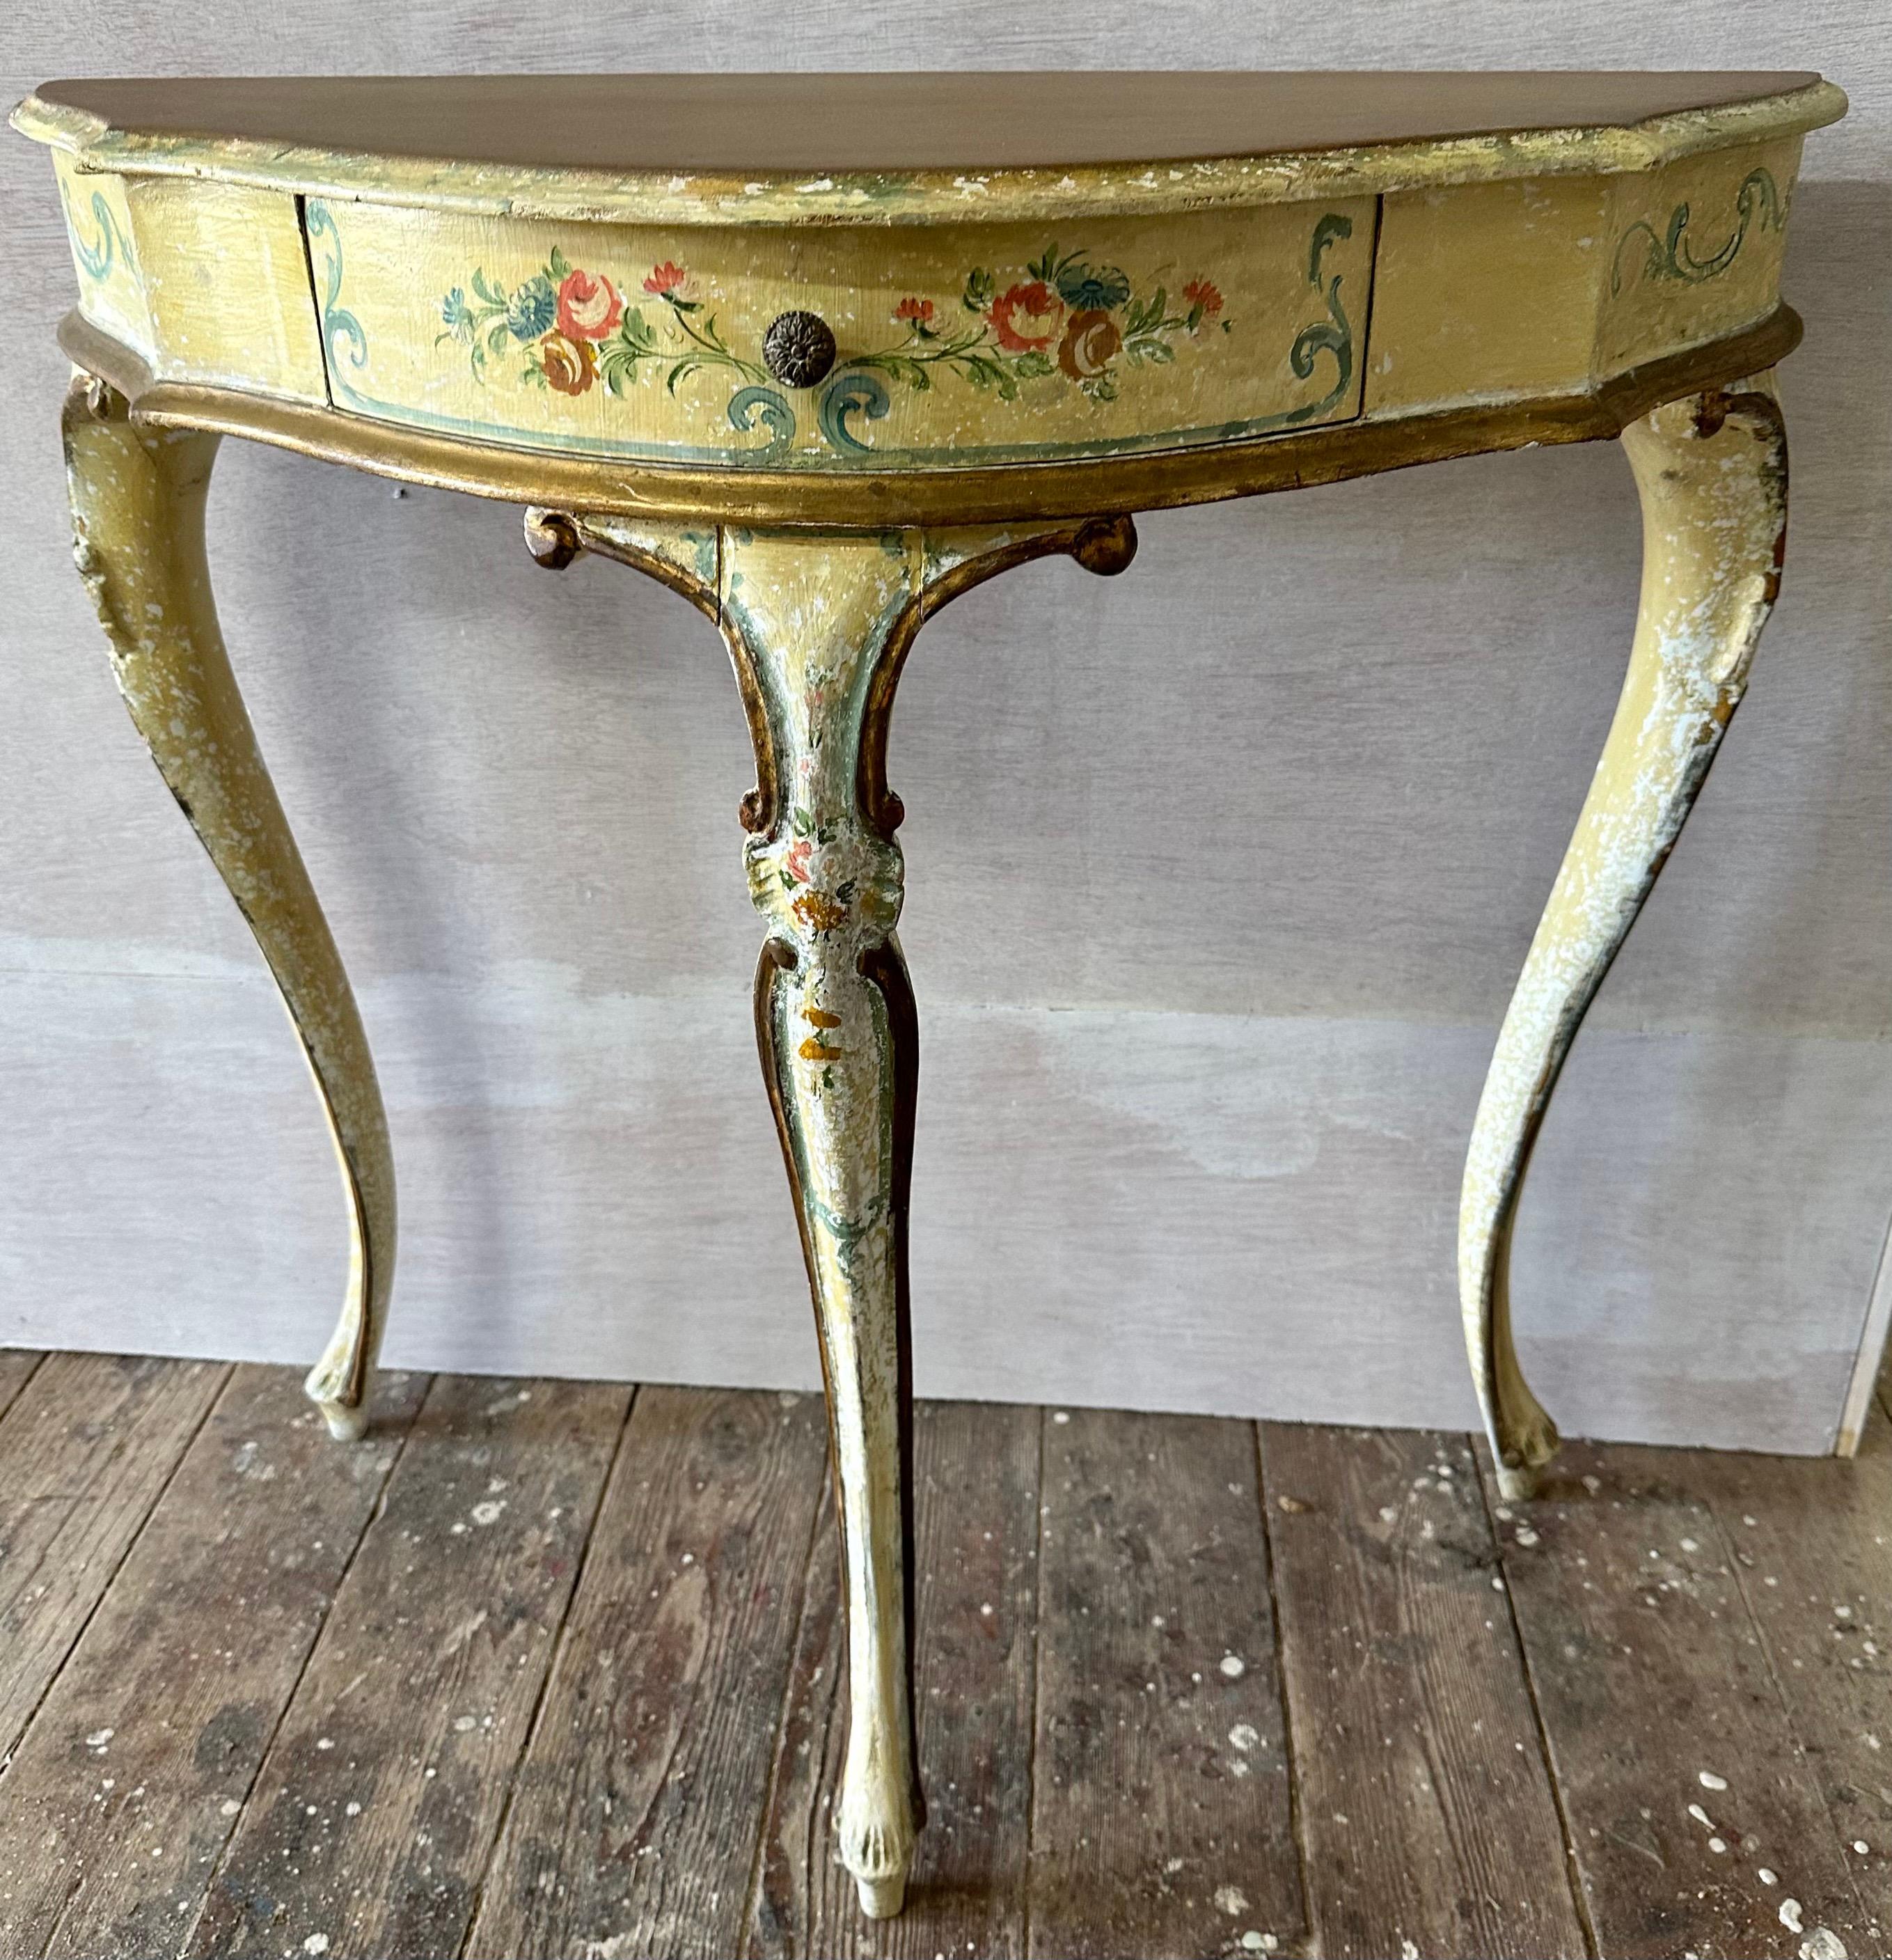 This French Rococo style console table, The distressed ivory painted finish. Three cabriole legs support the table beneath. Beautifully unique, this table will add a bit of romance and mystery to any room.Console table, serpentine top with molded